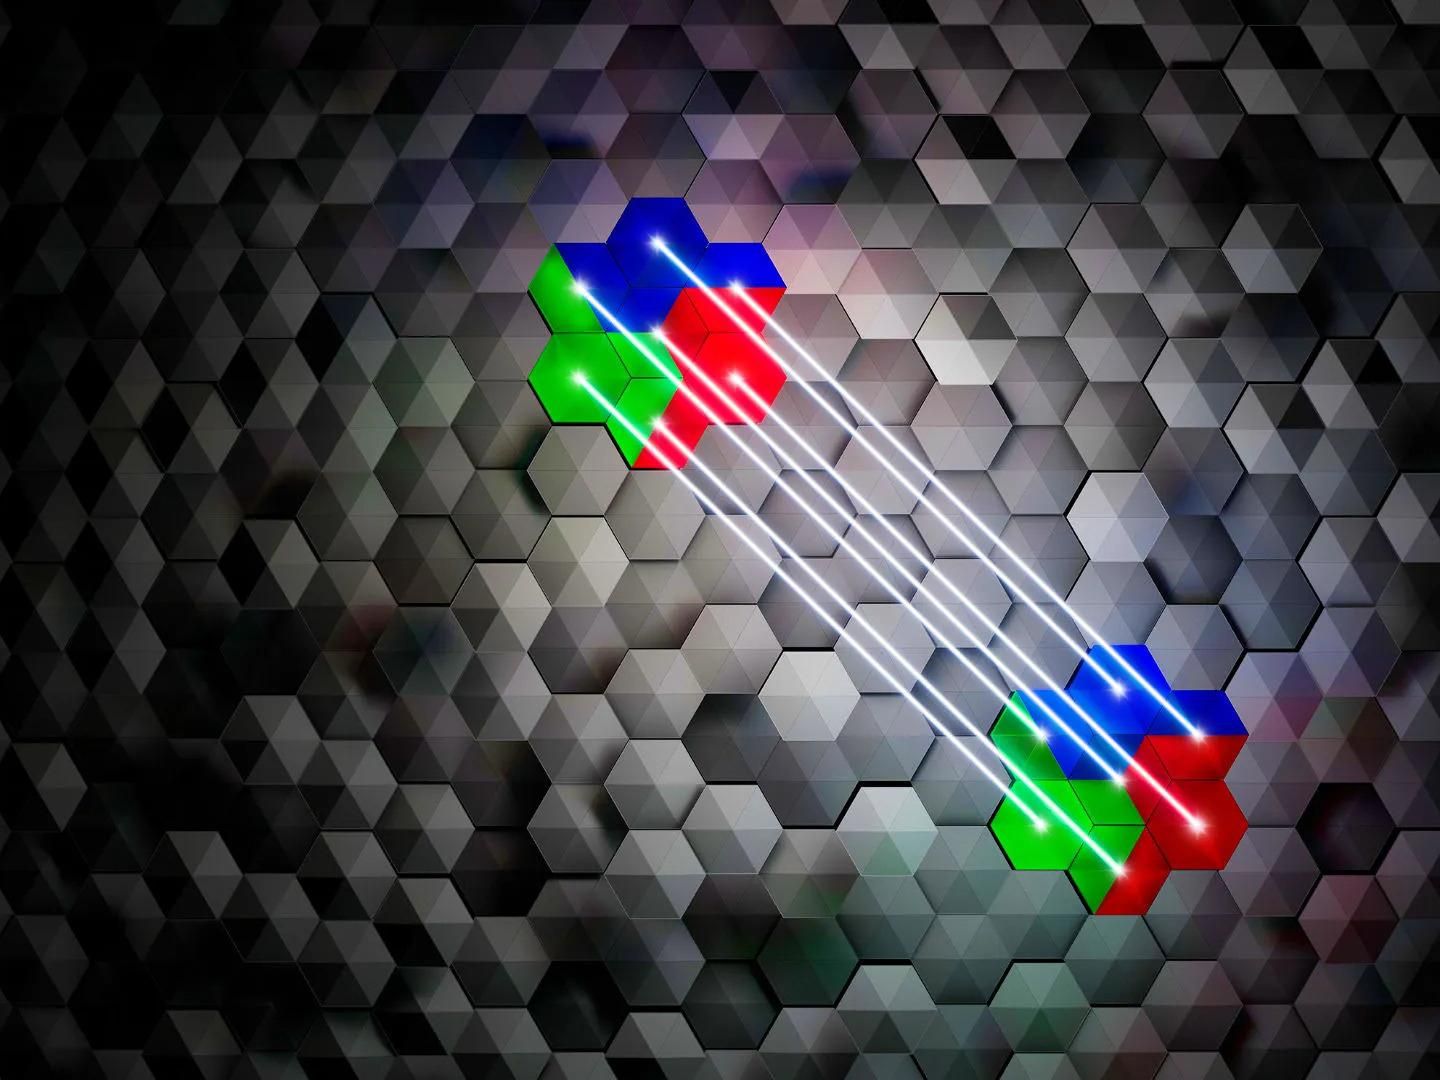 Connected silver hexagons, with two shapes of 7 collected hexagons in red, blue and green, connected by seven beams of white.